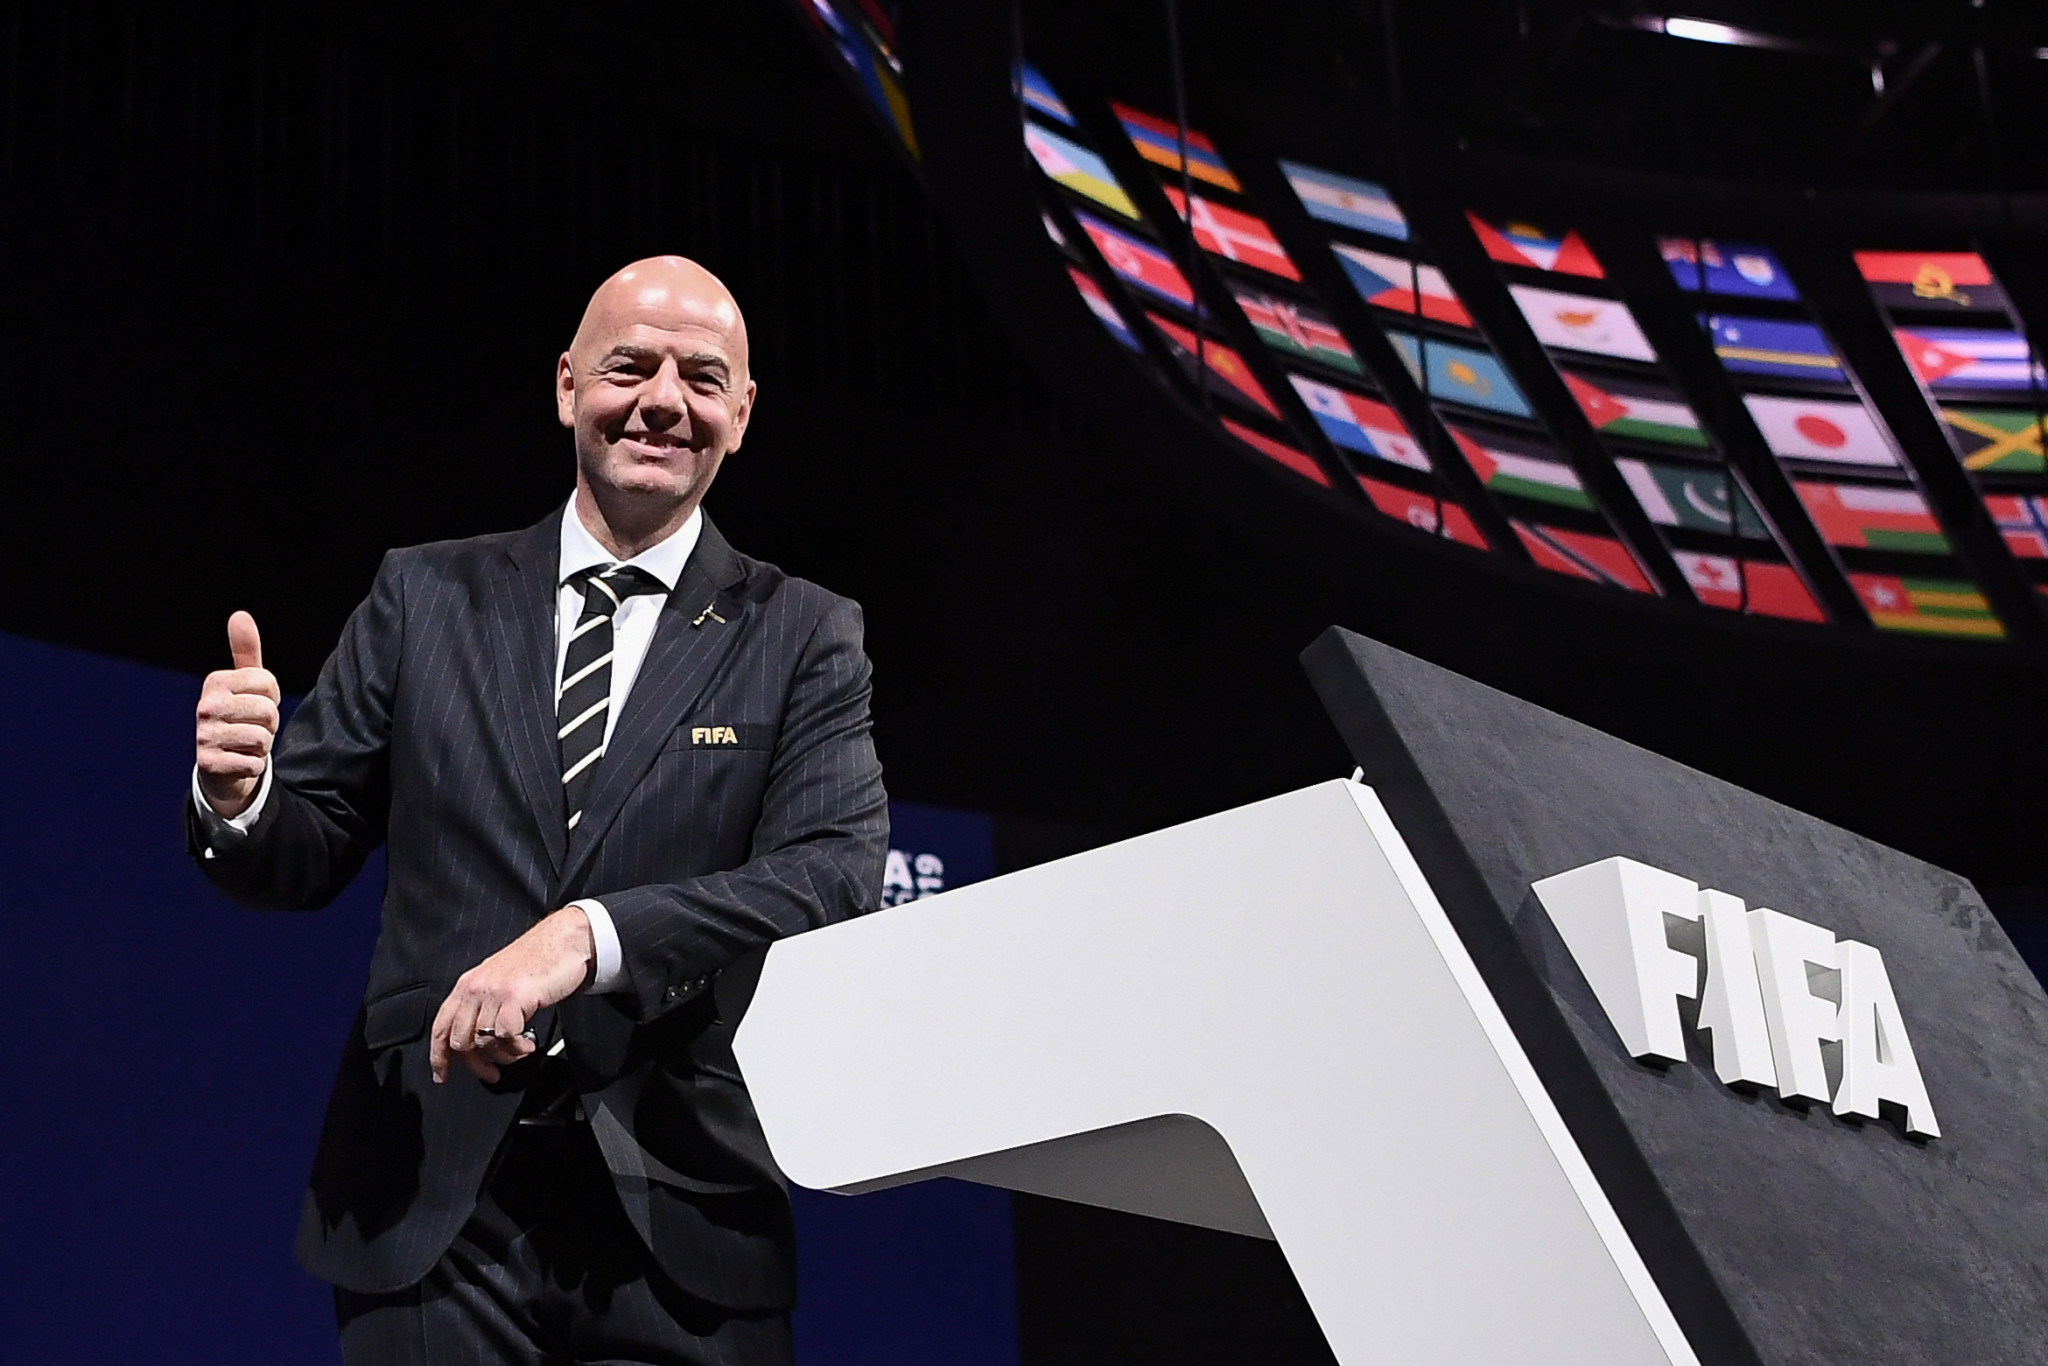 FIFA President Gianni Infantino was re-elected for a second term at the FIFA Congress on Tuesday but already the organisation is embroiled in a new corruption scandal ©Getty Images